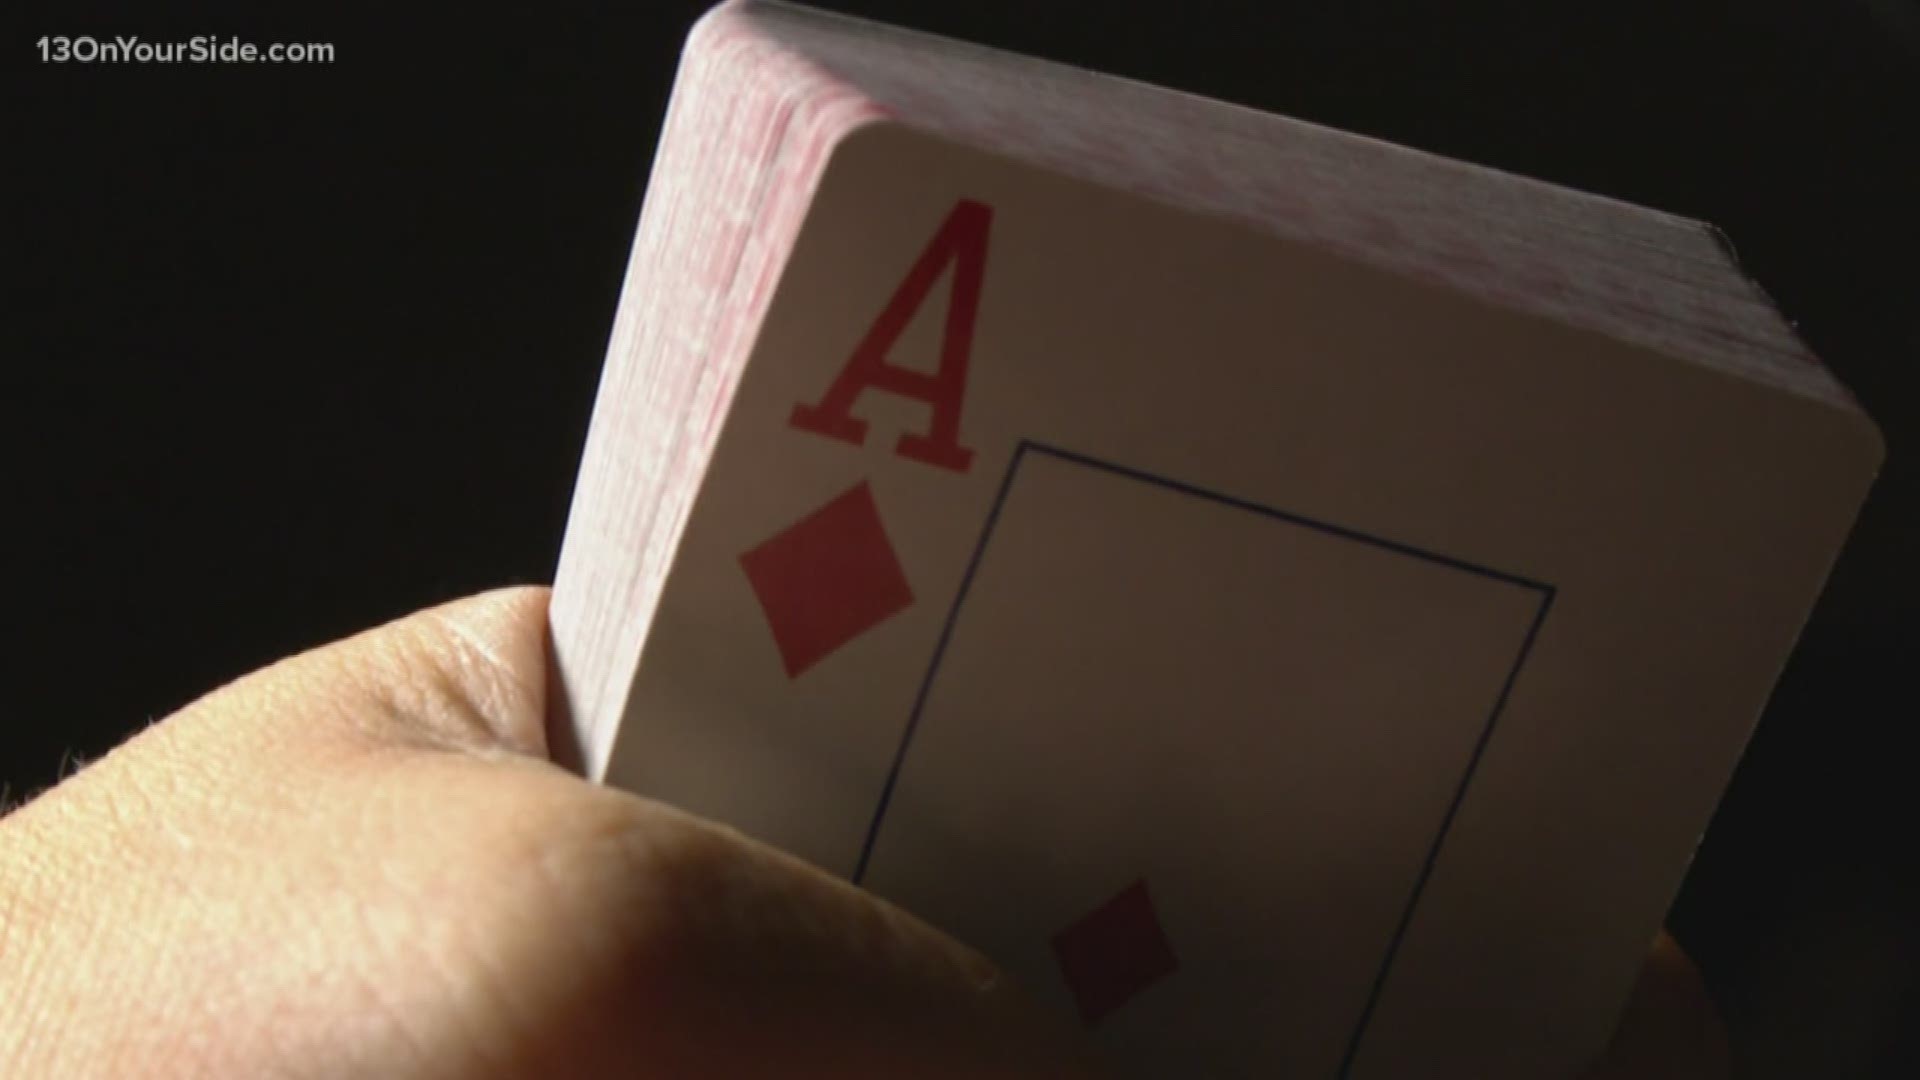 Scaling cards was popularized by magicians in the 1800s.